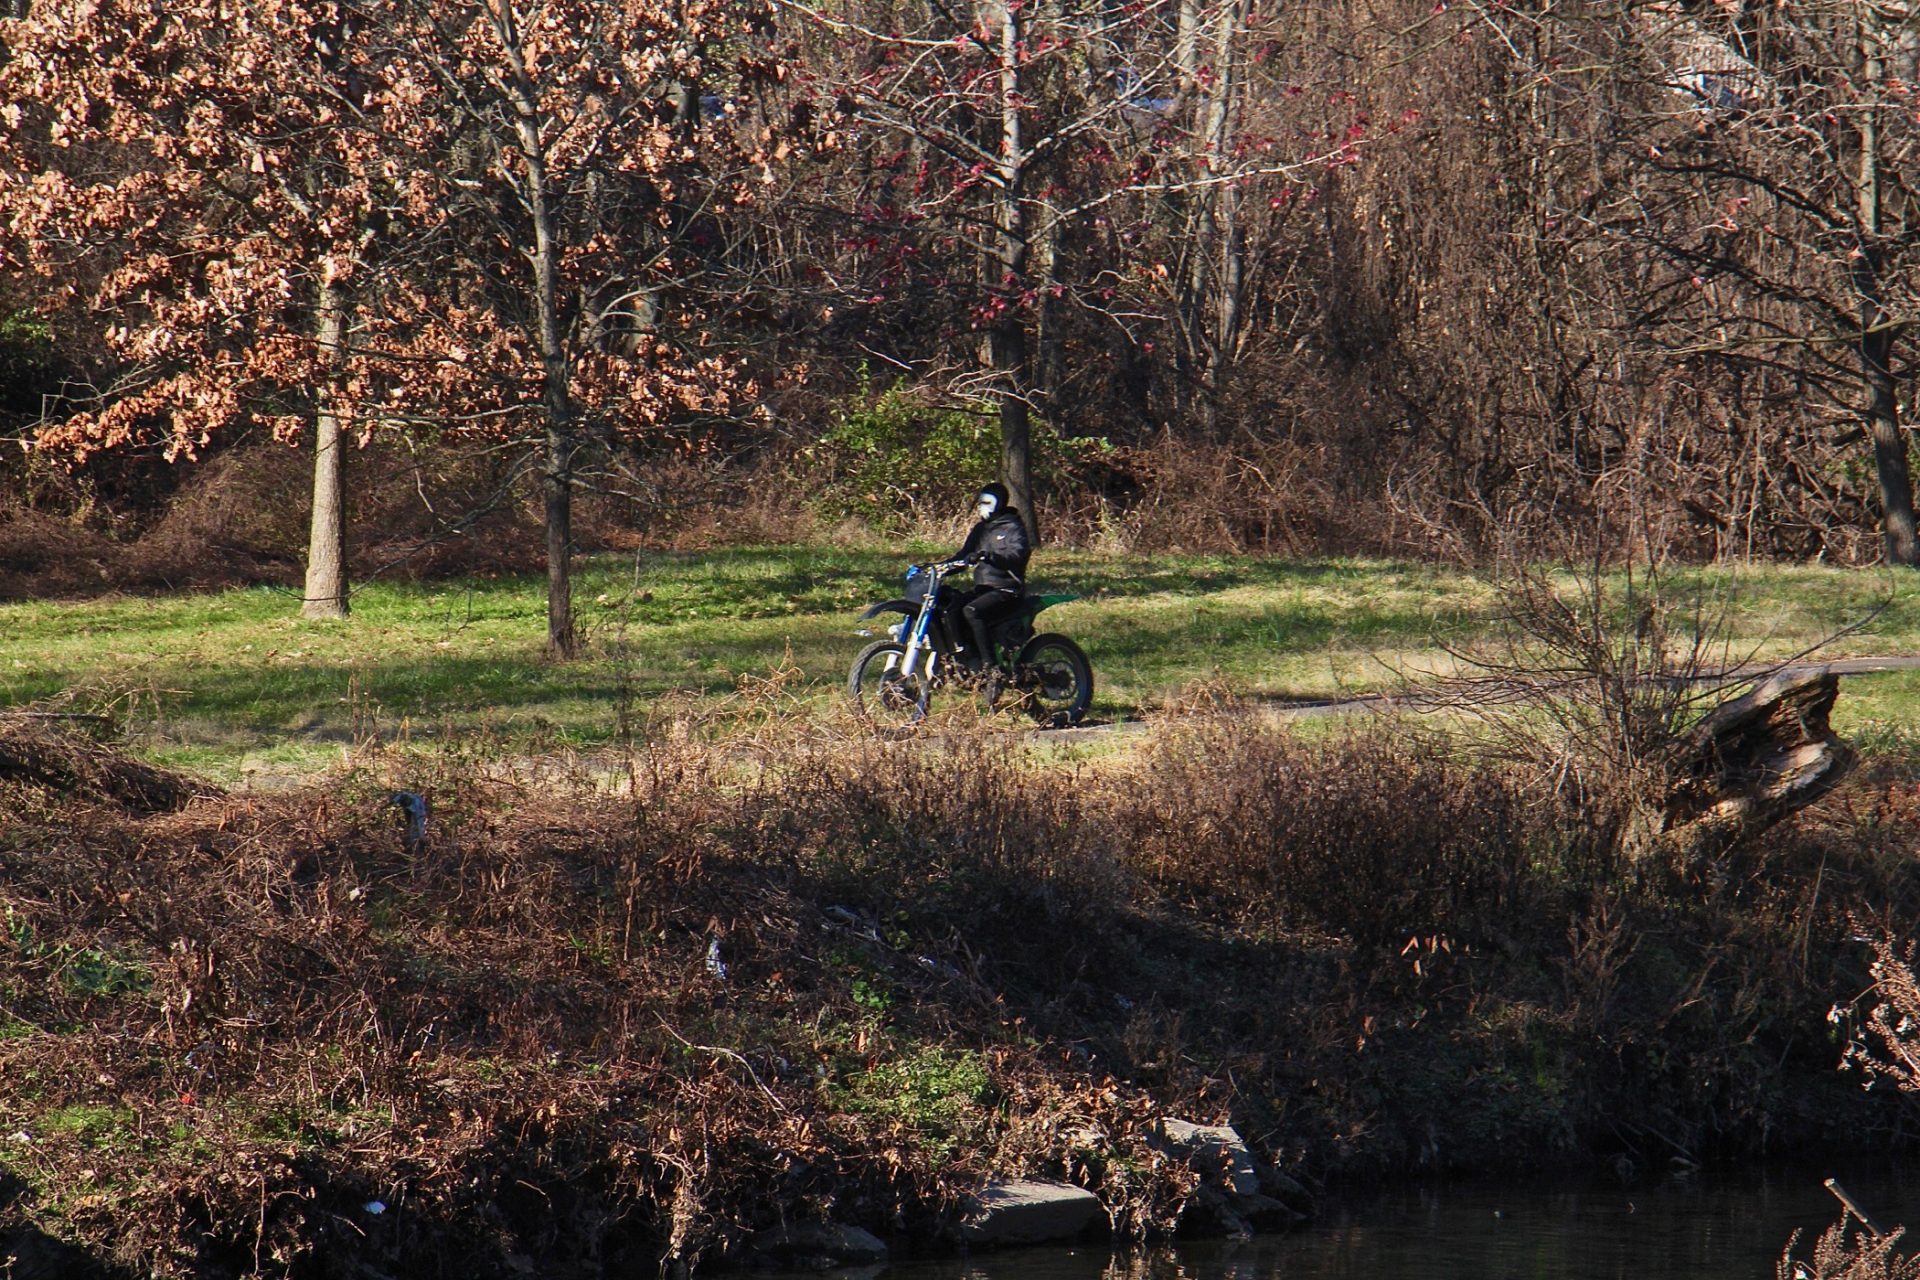 An off-roader rides his dirt bike on the trails at Tacony Creek Park.